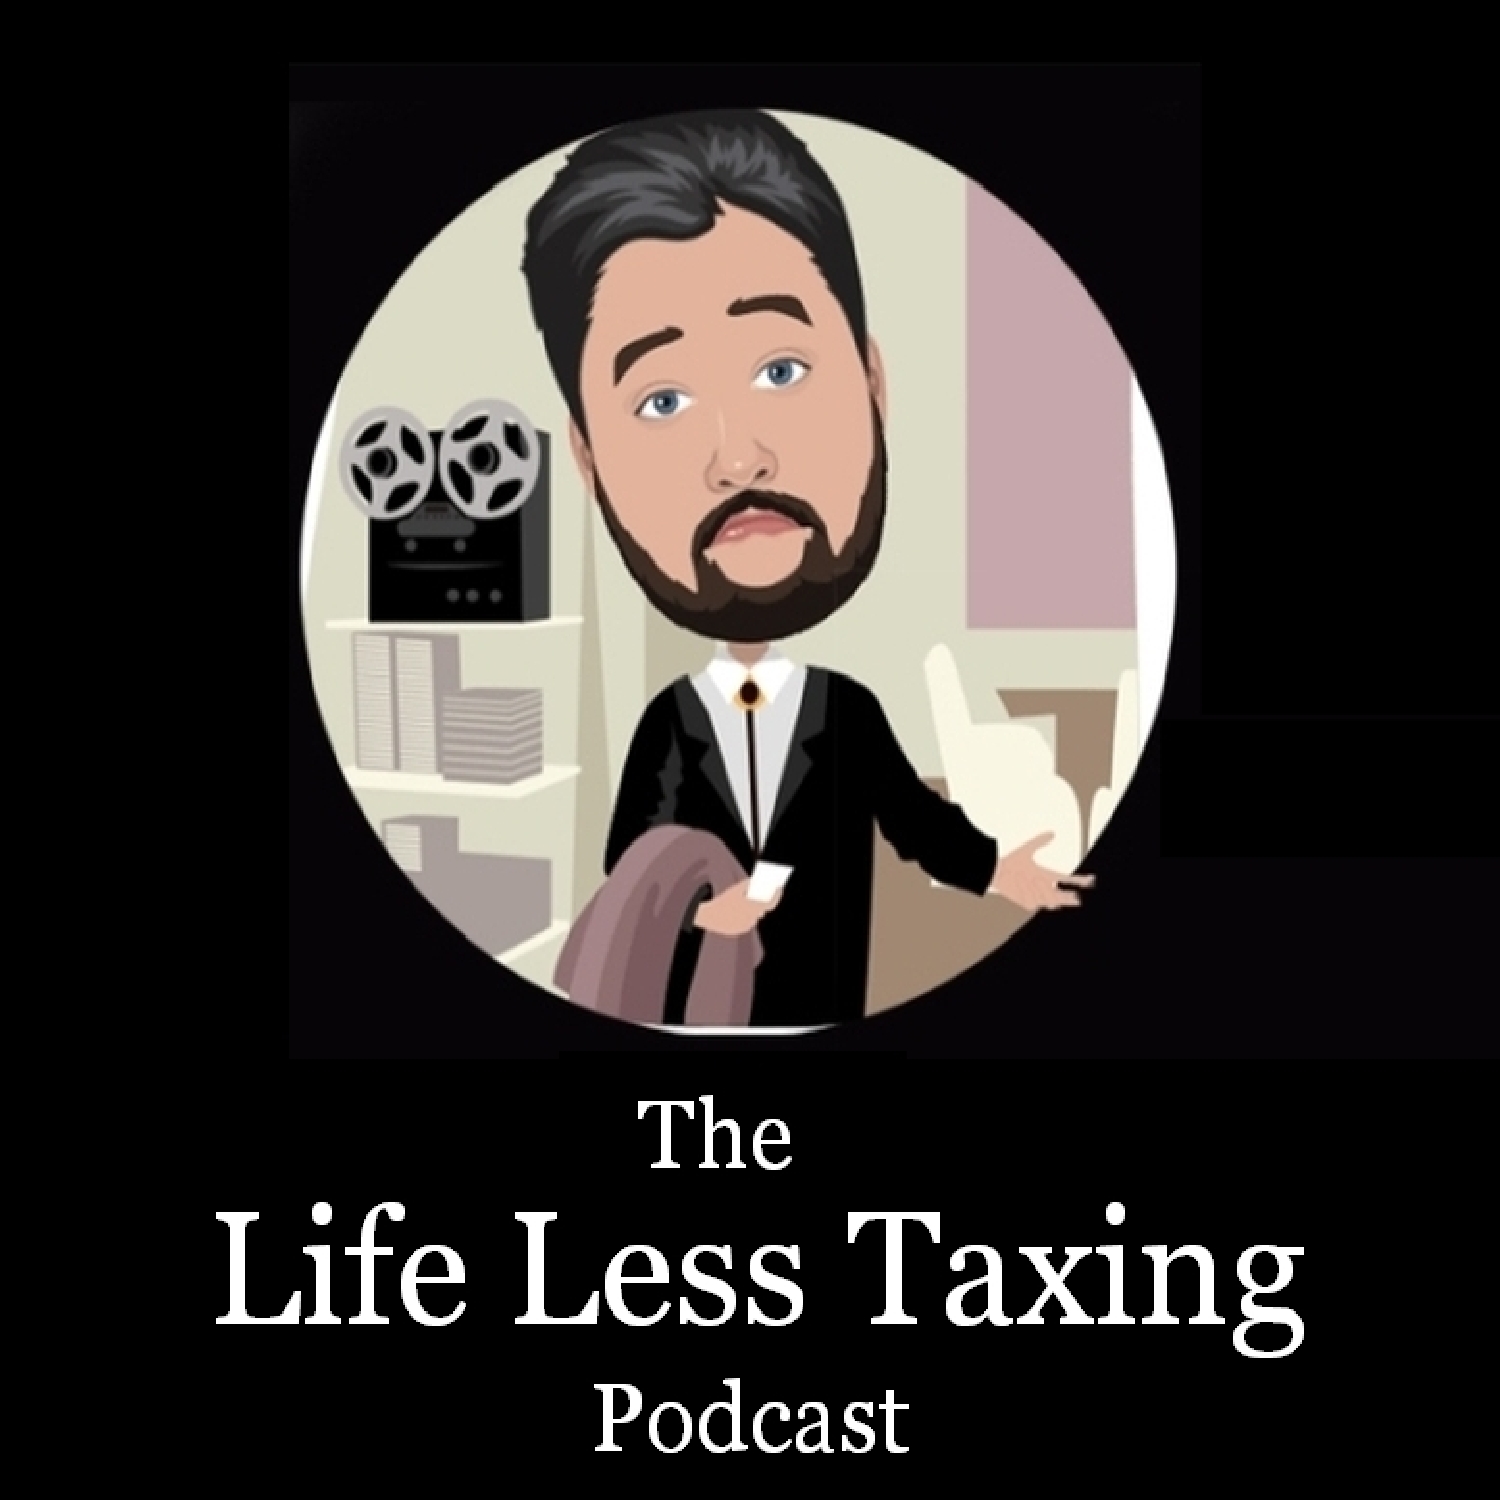 The Life Less Taxing Podcast